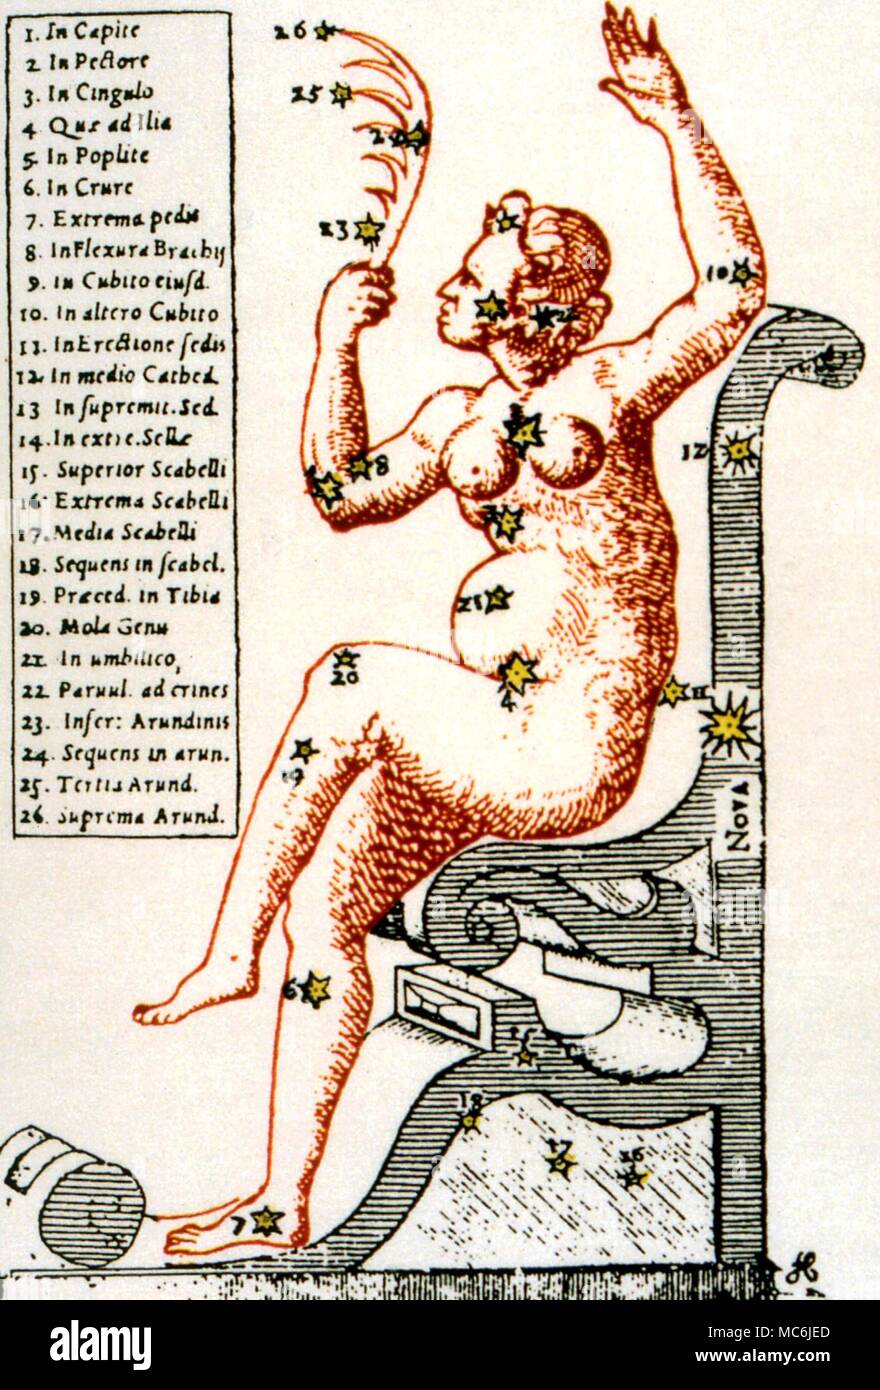 NOSTRADAMUS - - PREDICTION OF NOVA. In Quatrain 2:41 (published 1555), Nostradamus predicted the Nova, or New Star, of 1572. The Nova appeared in the constellation of Cassiopeia, set in the back of her chair. The illustration is from Tycho Brahe, Astronomiae Instauratae Progymnasmata, 1602 Stock Photo